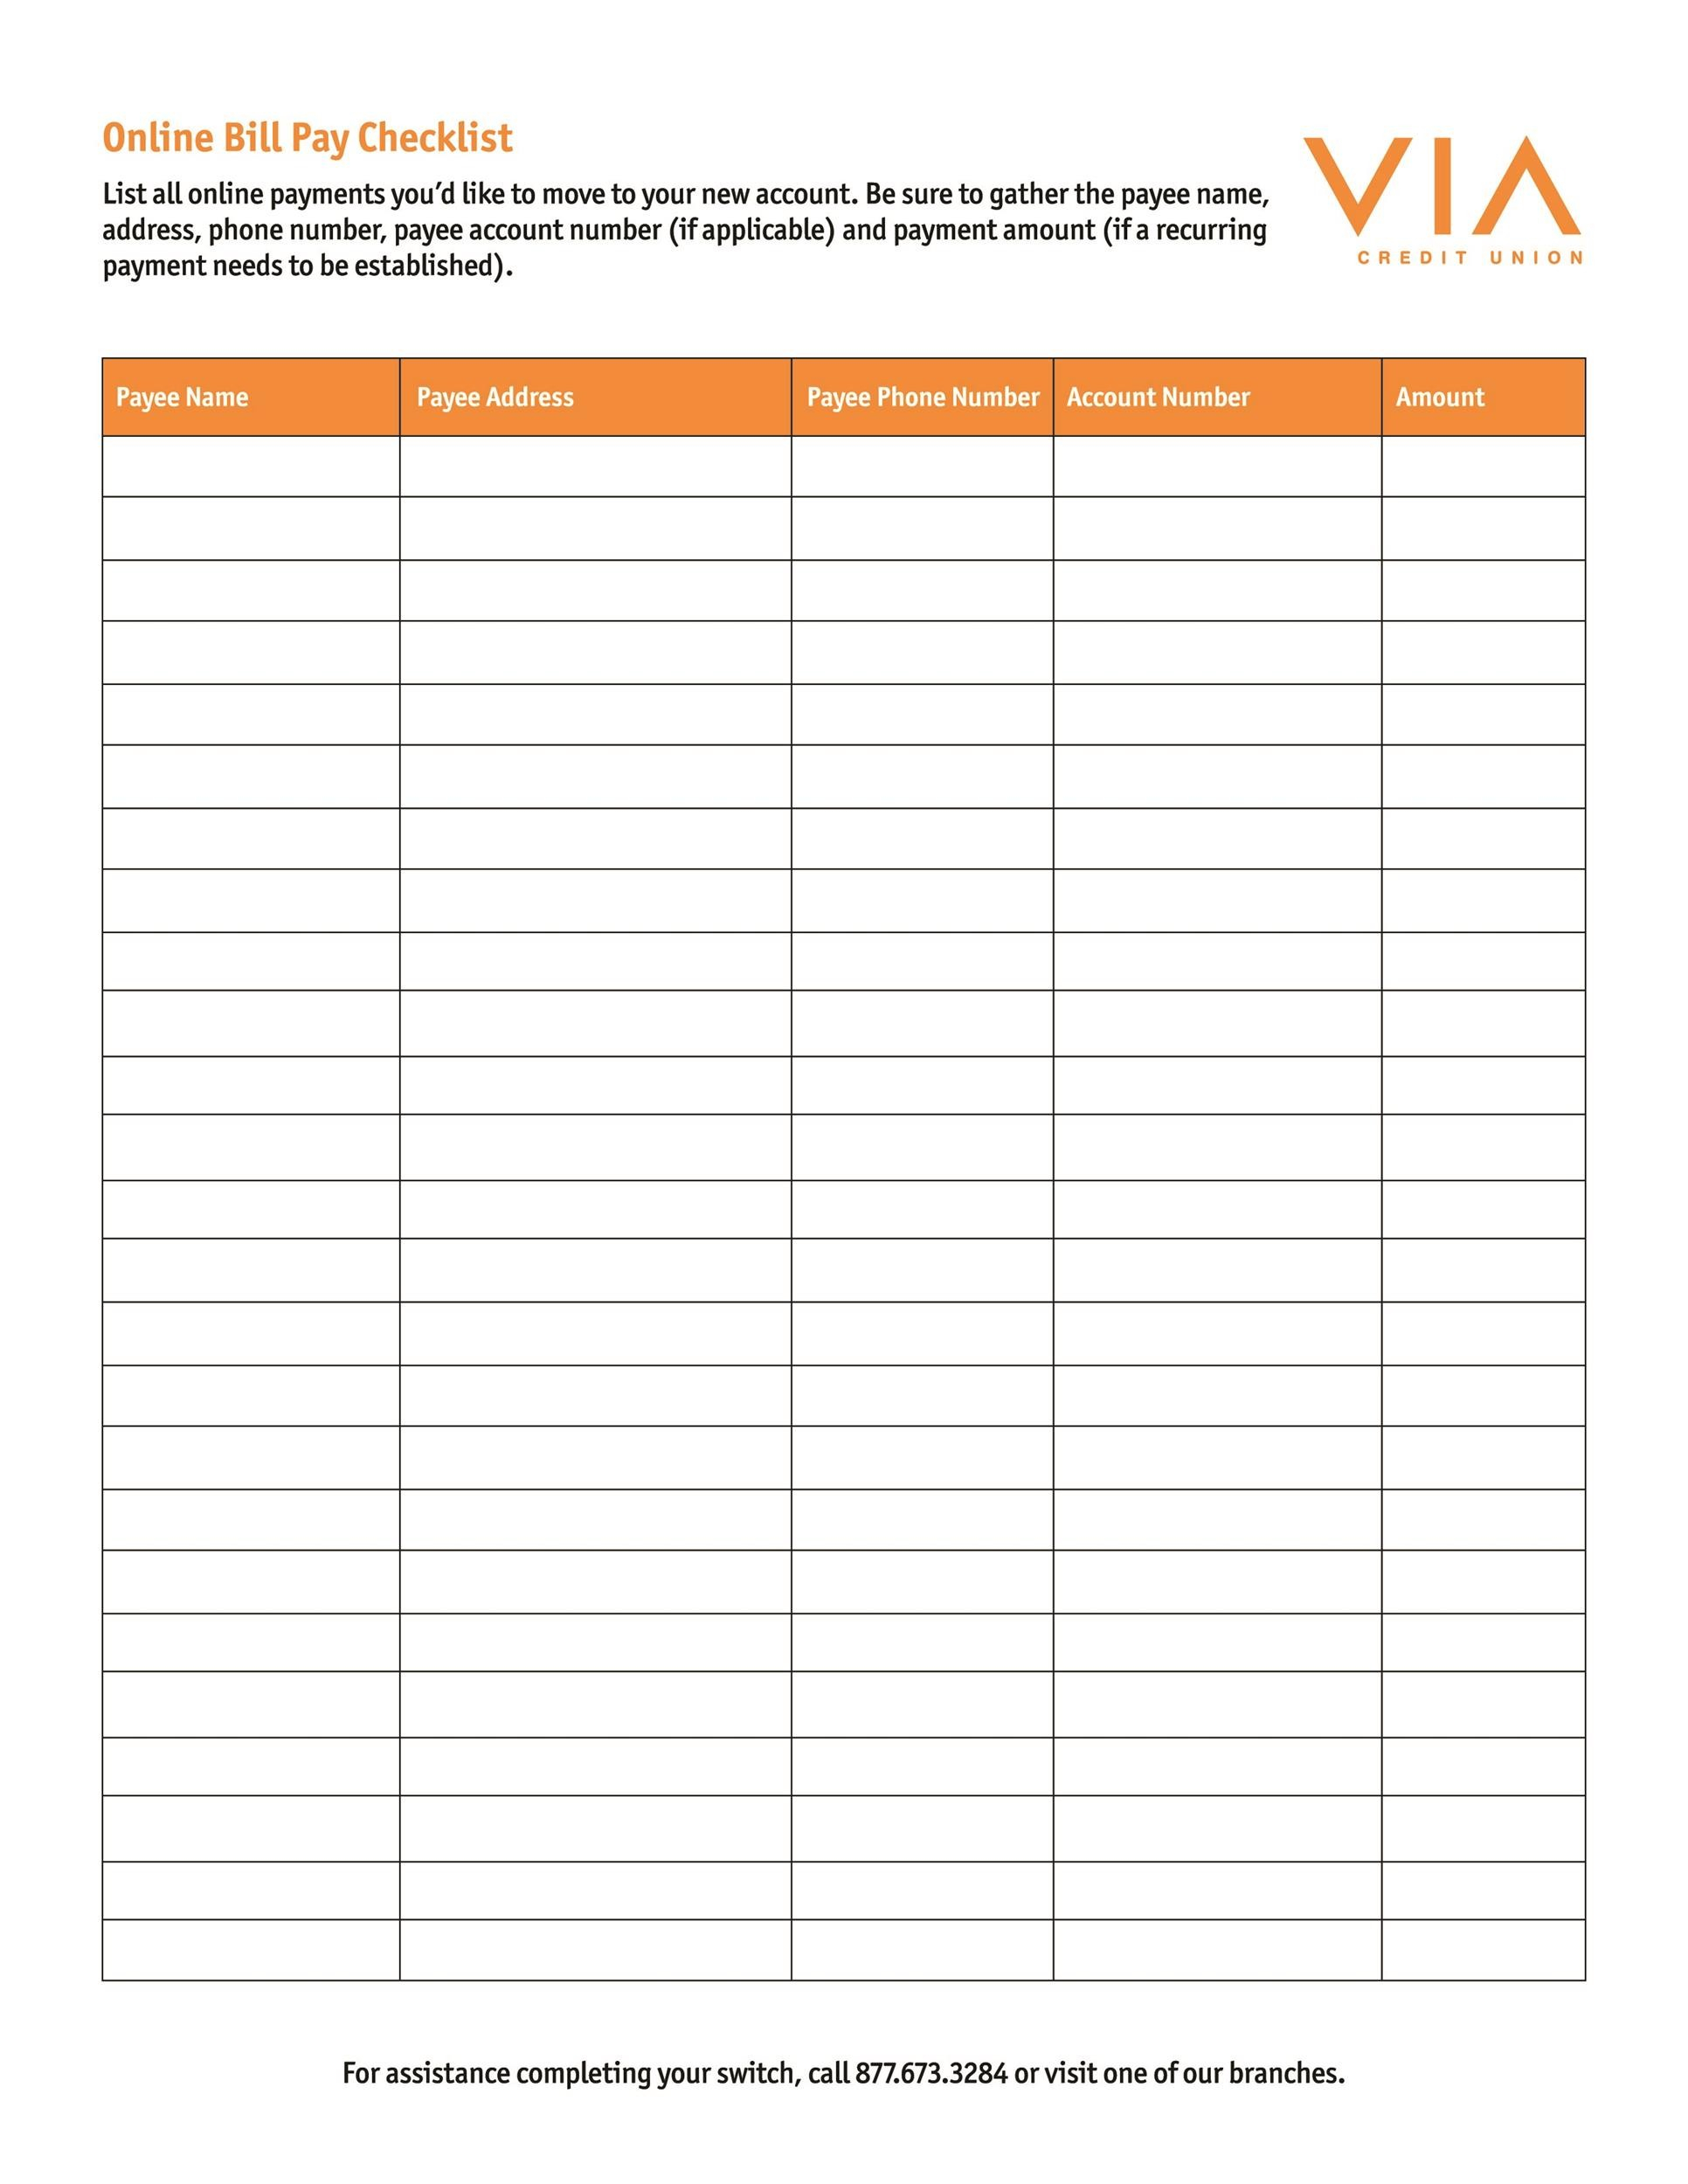 10 Free Bill Pay Checklists & Bill Calendars (PDF, Word & Excel) With Regard To Accounts Payable Checklist Template With Regard To Accounts Payable Checklist Template